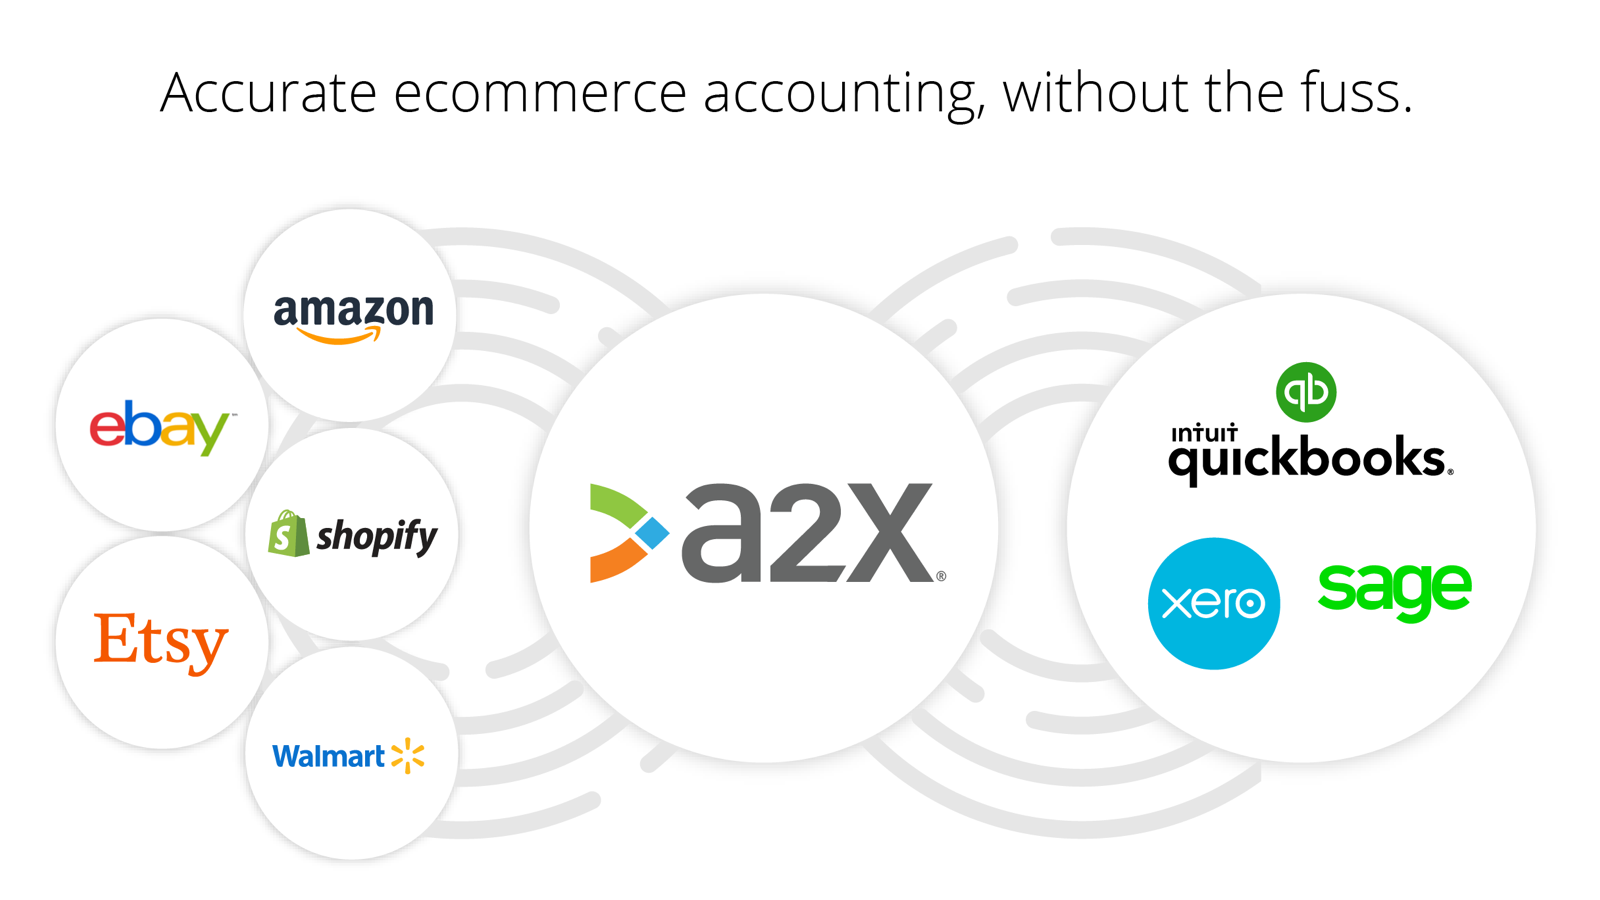 1. A2X has been trusted by 1000s of stores.png